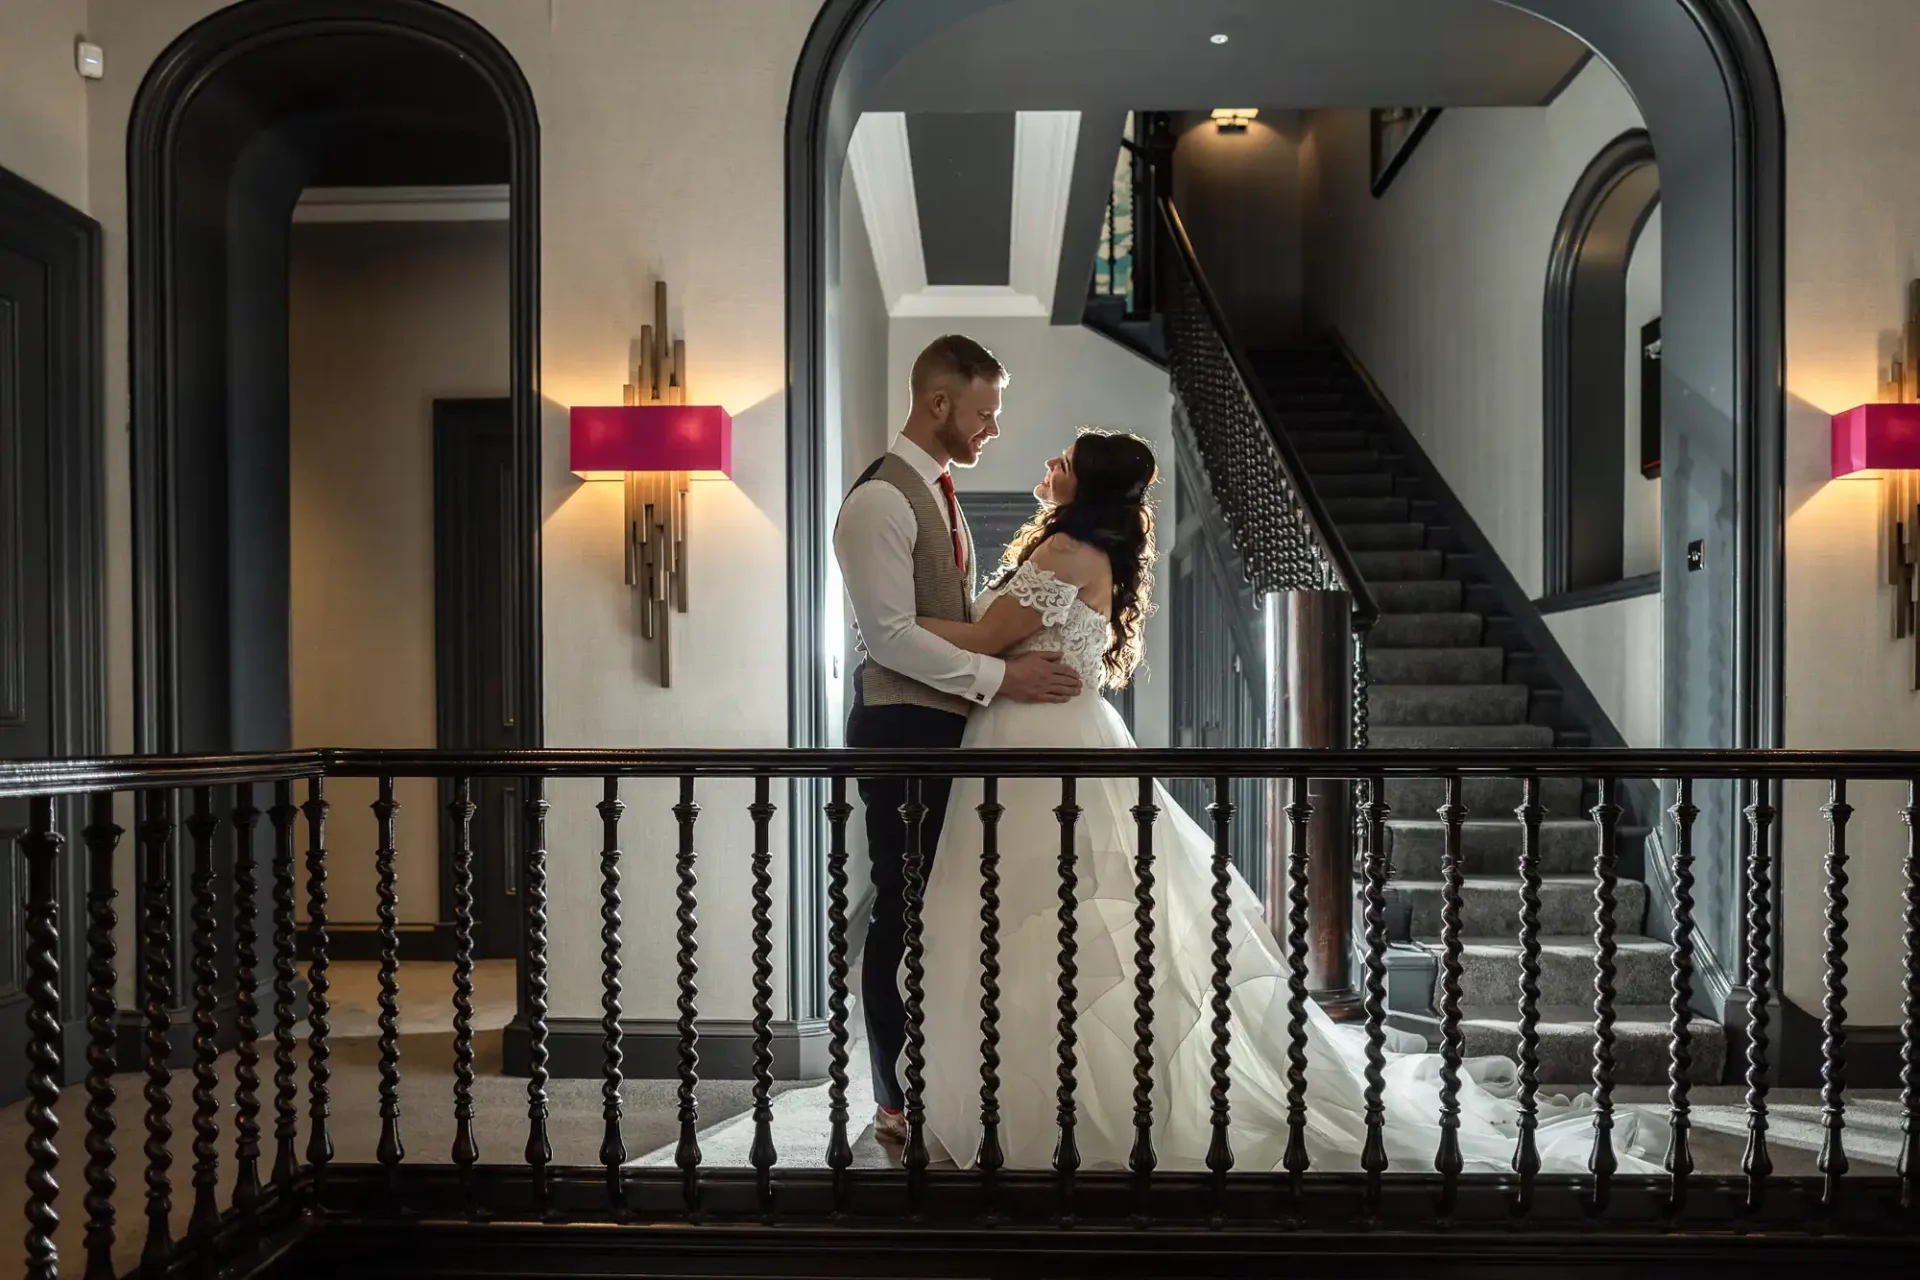 A bride and groom embrace on an ornate balcony inside a dimly lit building with elegant arches and wall sconces.